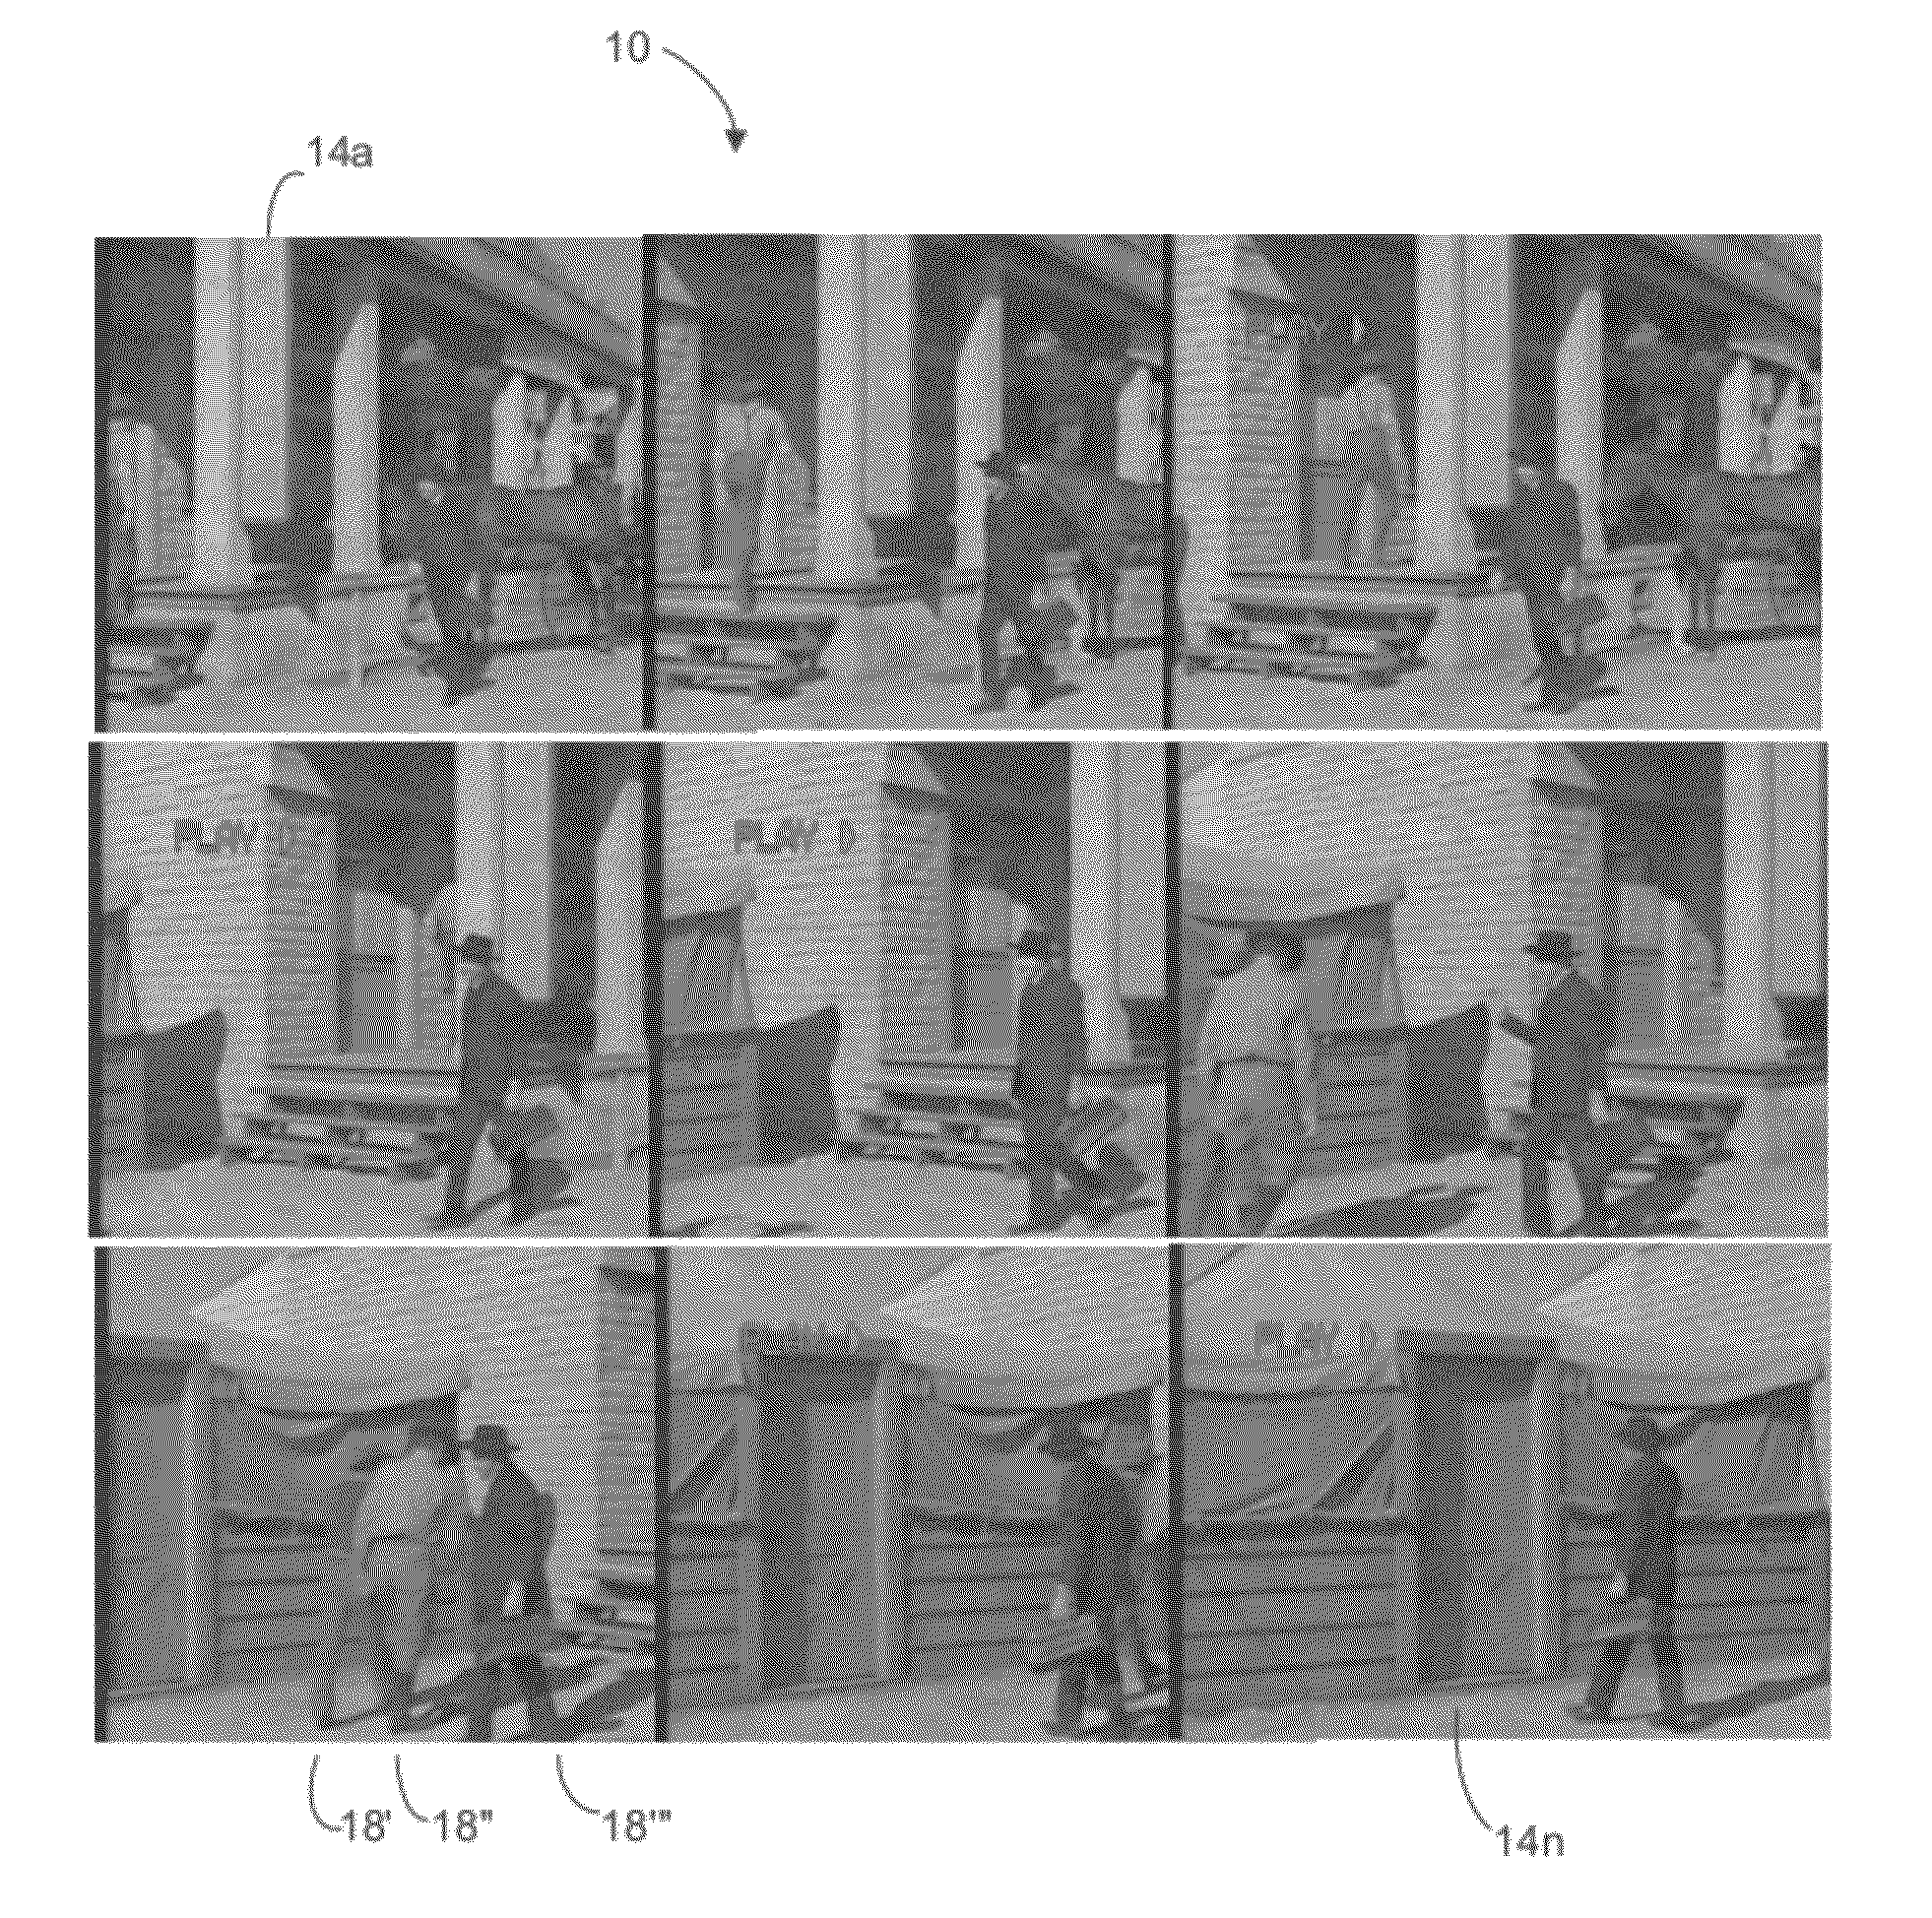 Minimal artifact image sequence depth enhancement system and method